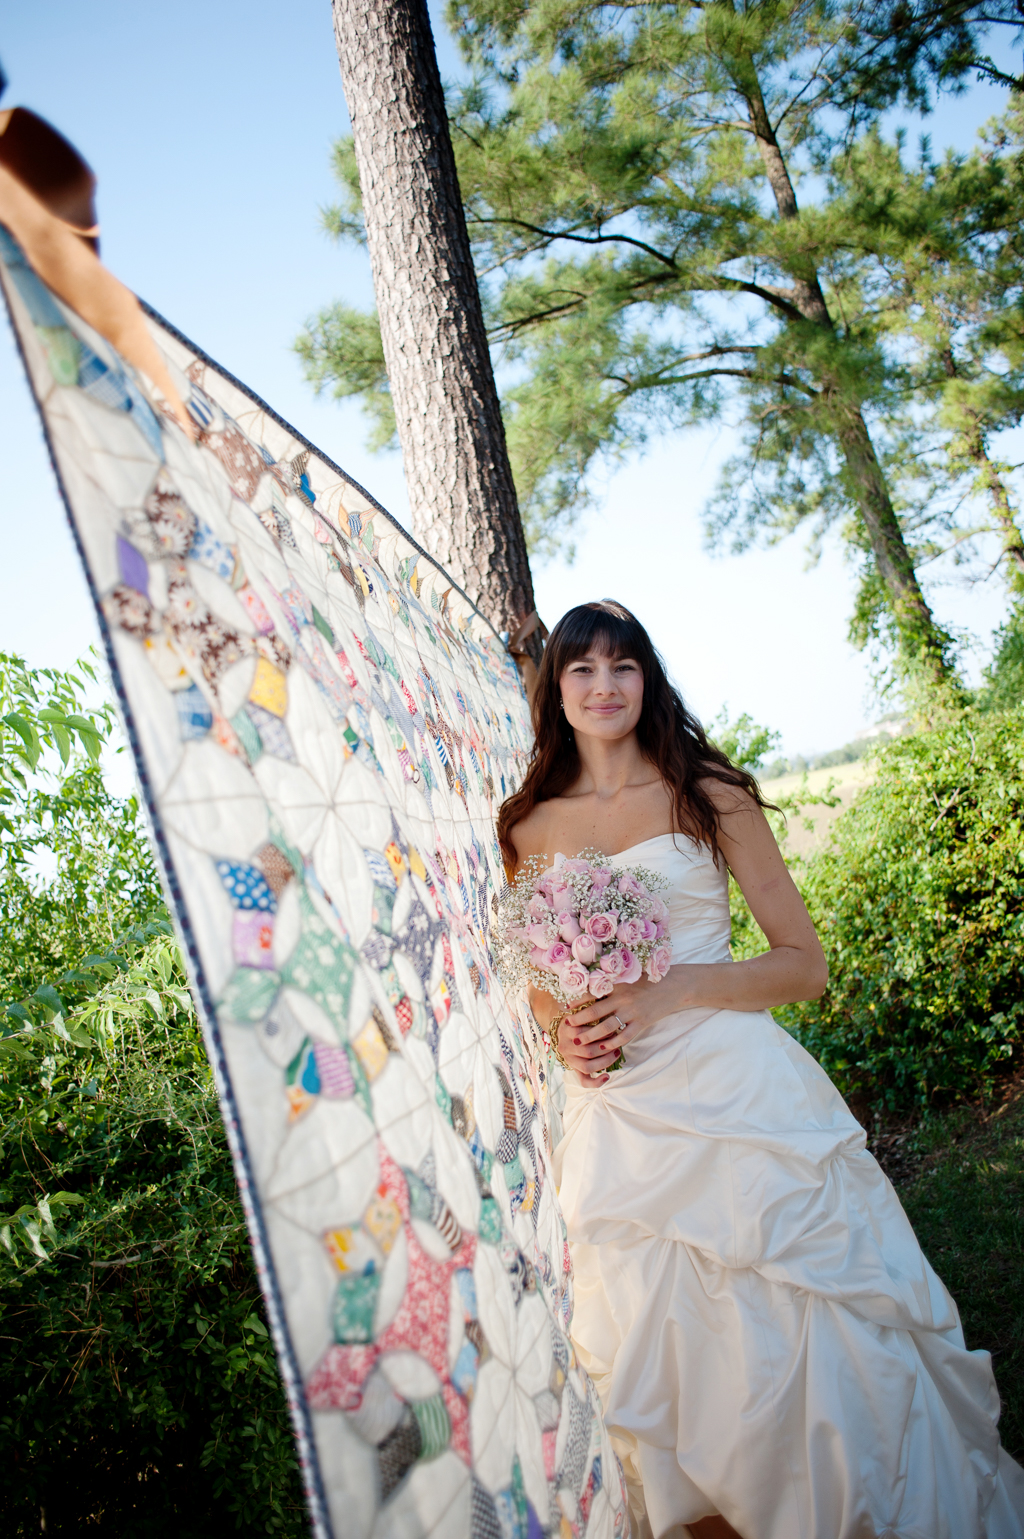 a colorful quilt hangs from a tree and a bride stands in front of it holding a bouquet of pink roses and baby's breath